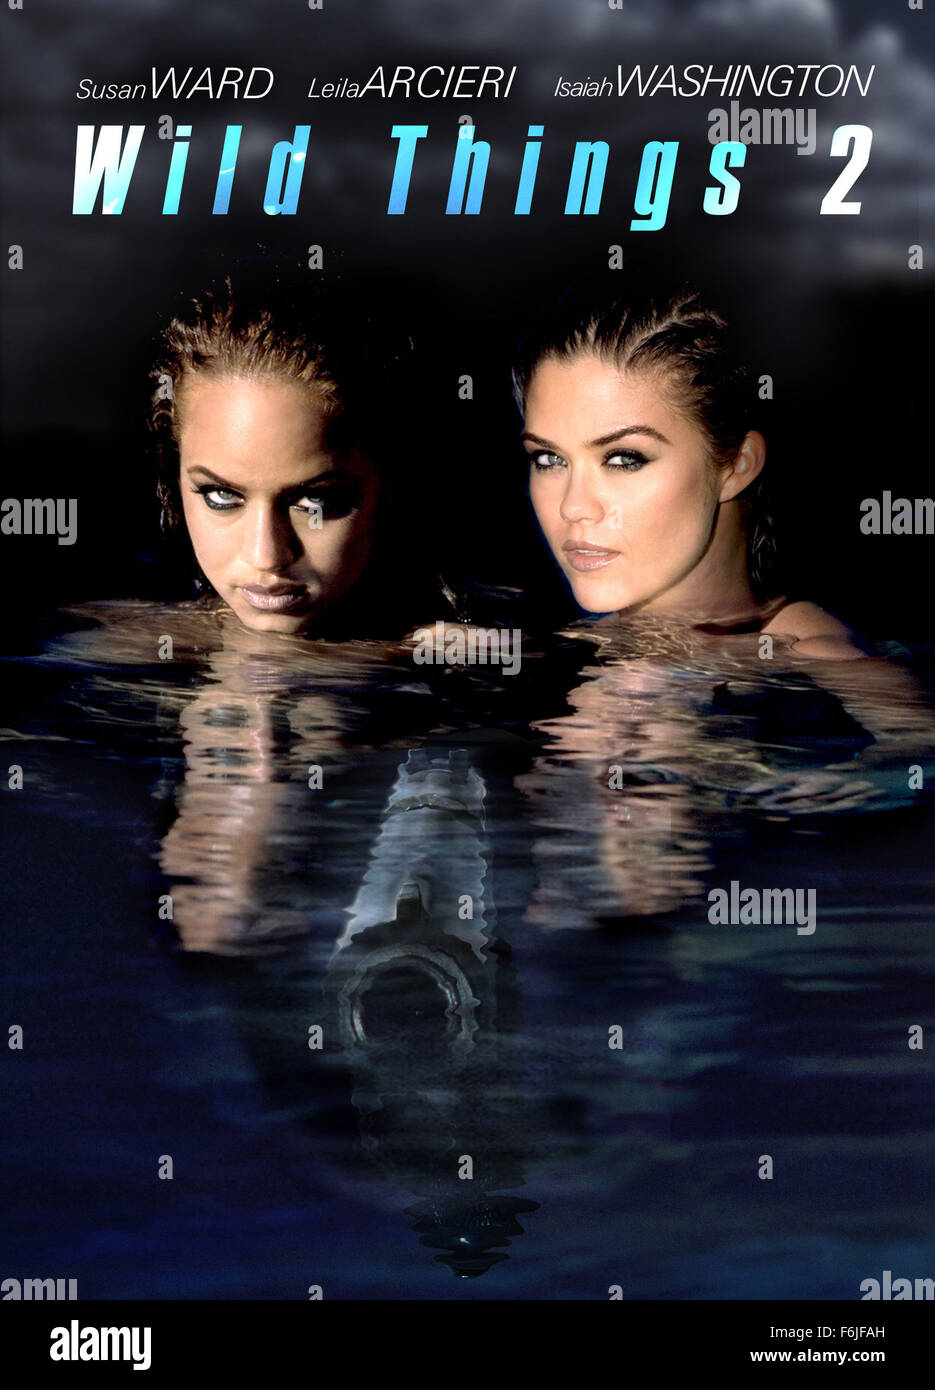 Feb 23, 2004; Palm Beach, FL, USA; Key poster art featuring LEILA ARCIERI (left) as Maya King and SUSAN WARD as Brittney Havers in the thrilling film ''Wild Things 2'' directed by Jack Perez. Stock Photo